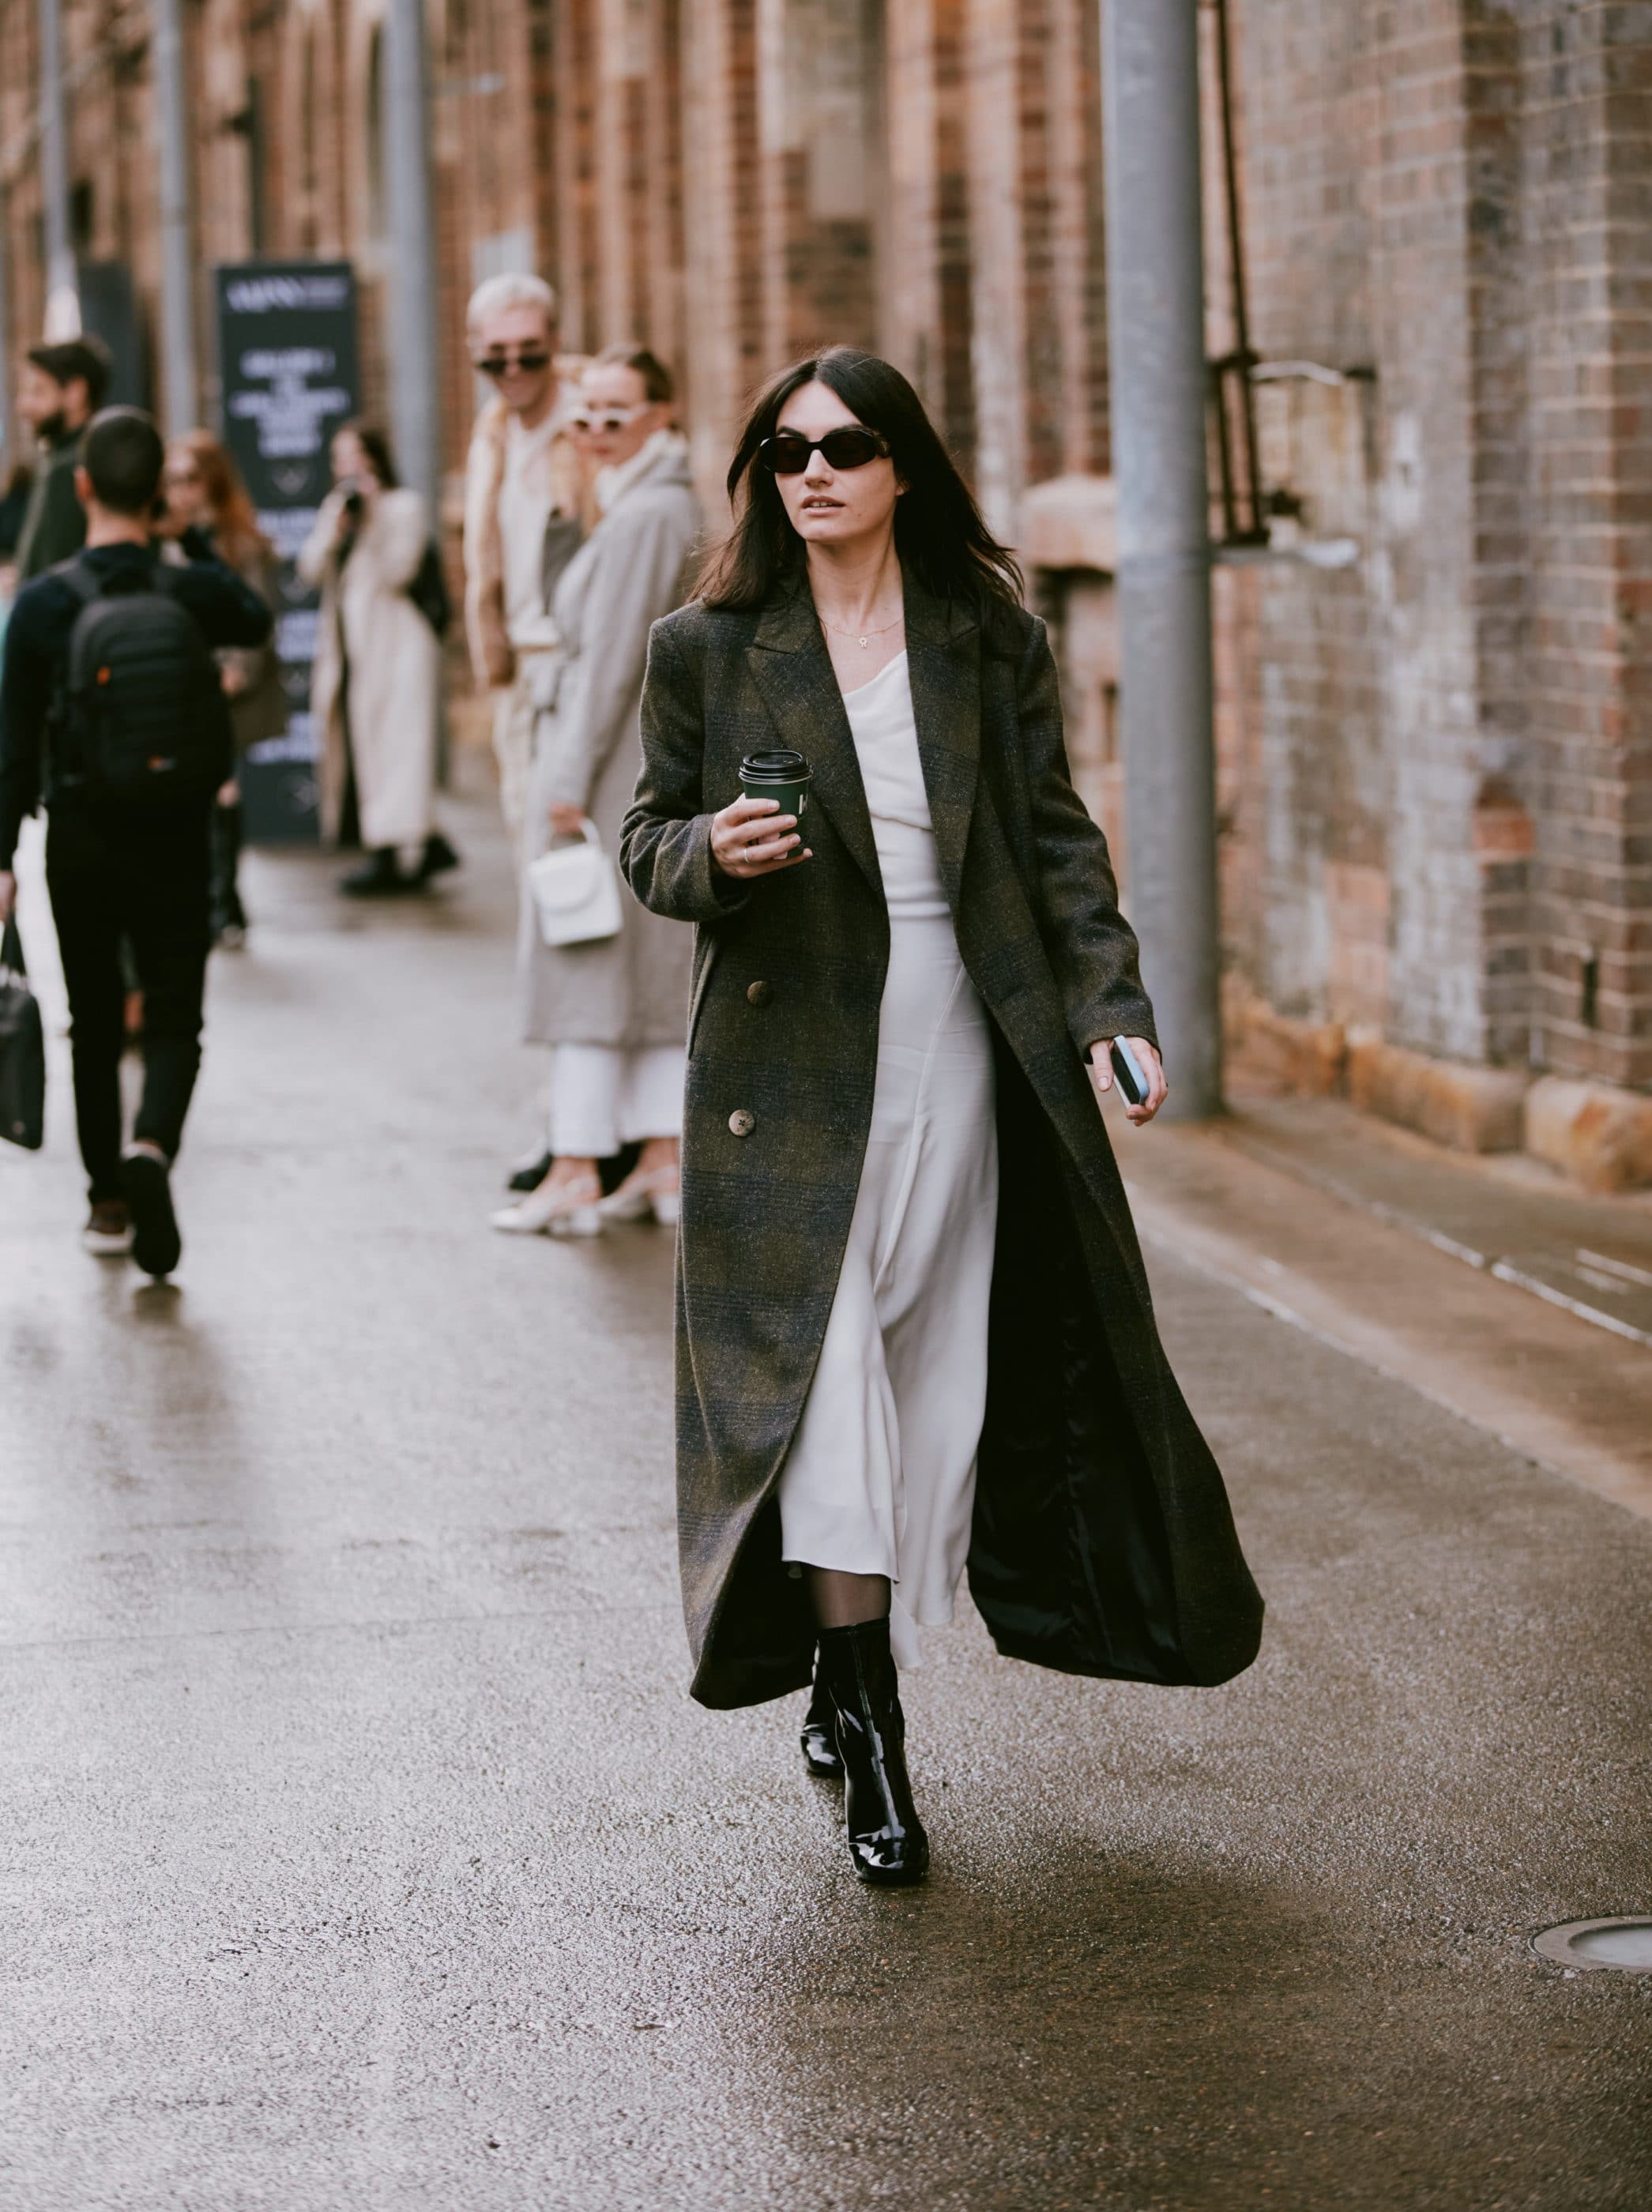 The best street style seen at AAFW 2022